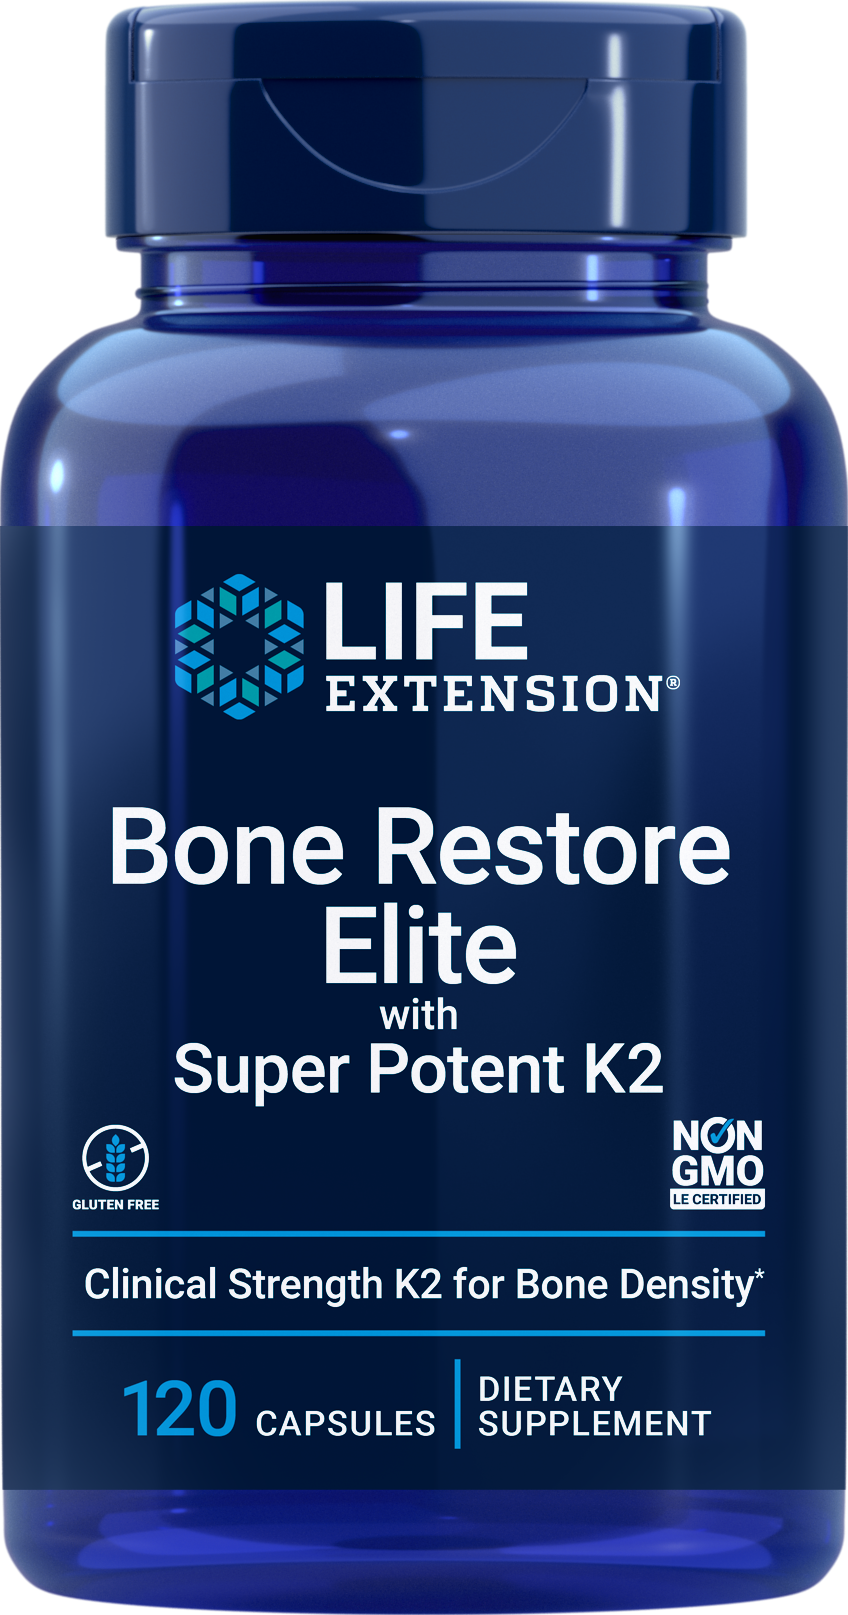 Life Extension's new Bone Restore Elite with Super Potent K2 provides calcium plus other nutrients such as clinical strength vitamin K2 to support bone density. Learn more at https://www.lifeextension.com/BoneElite. 